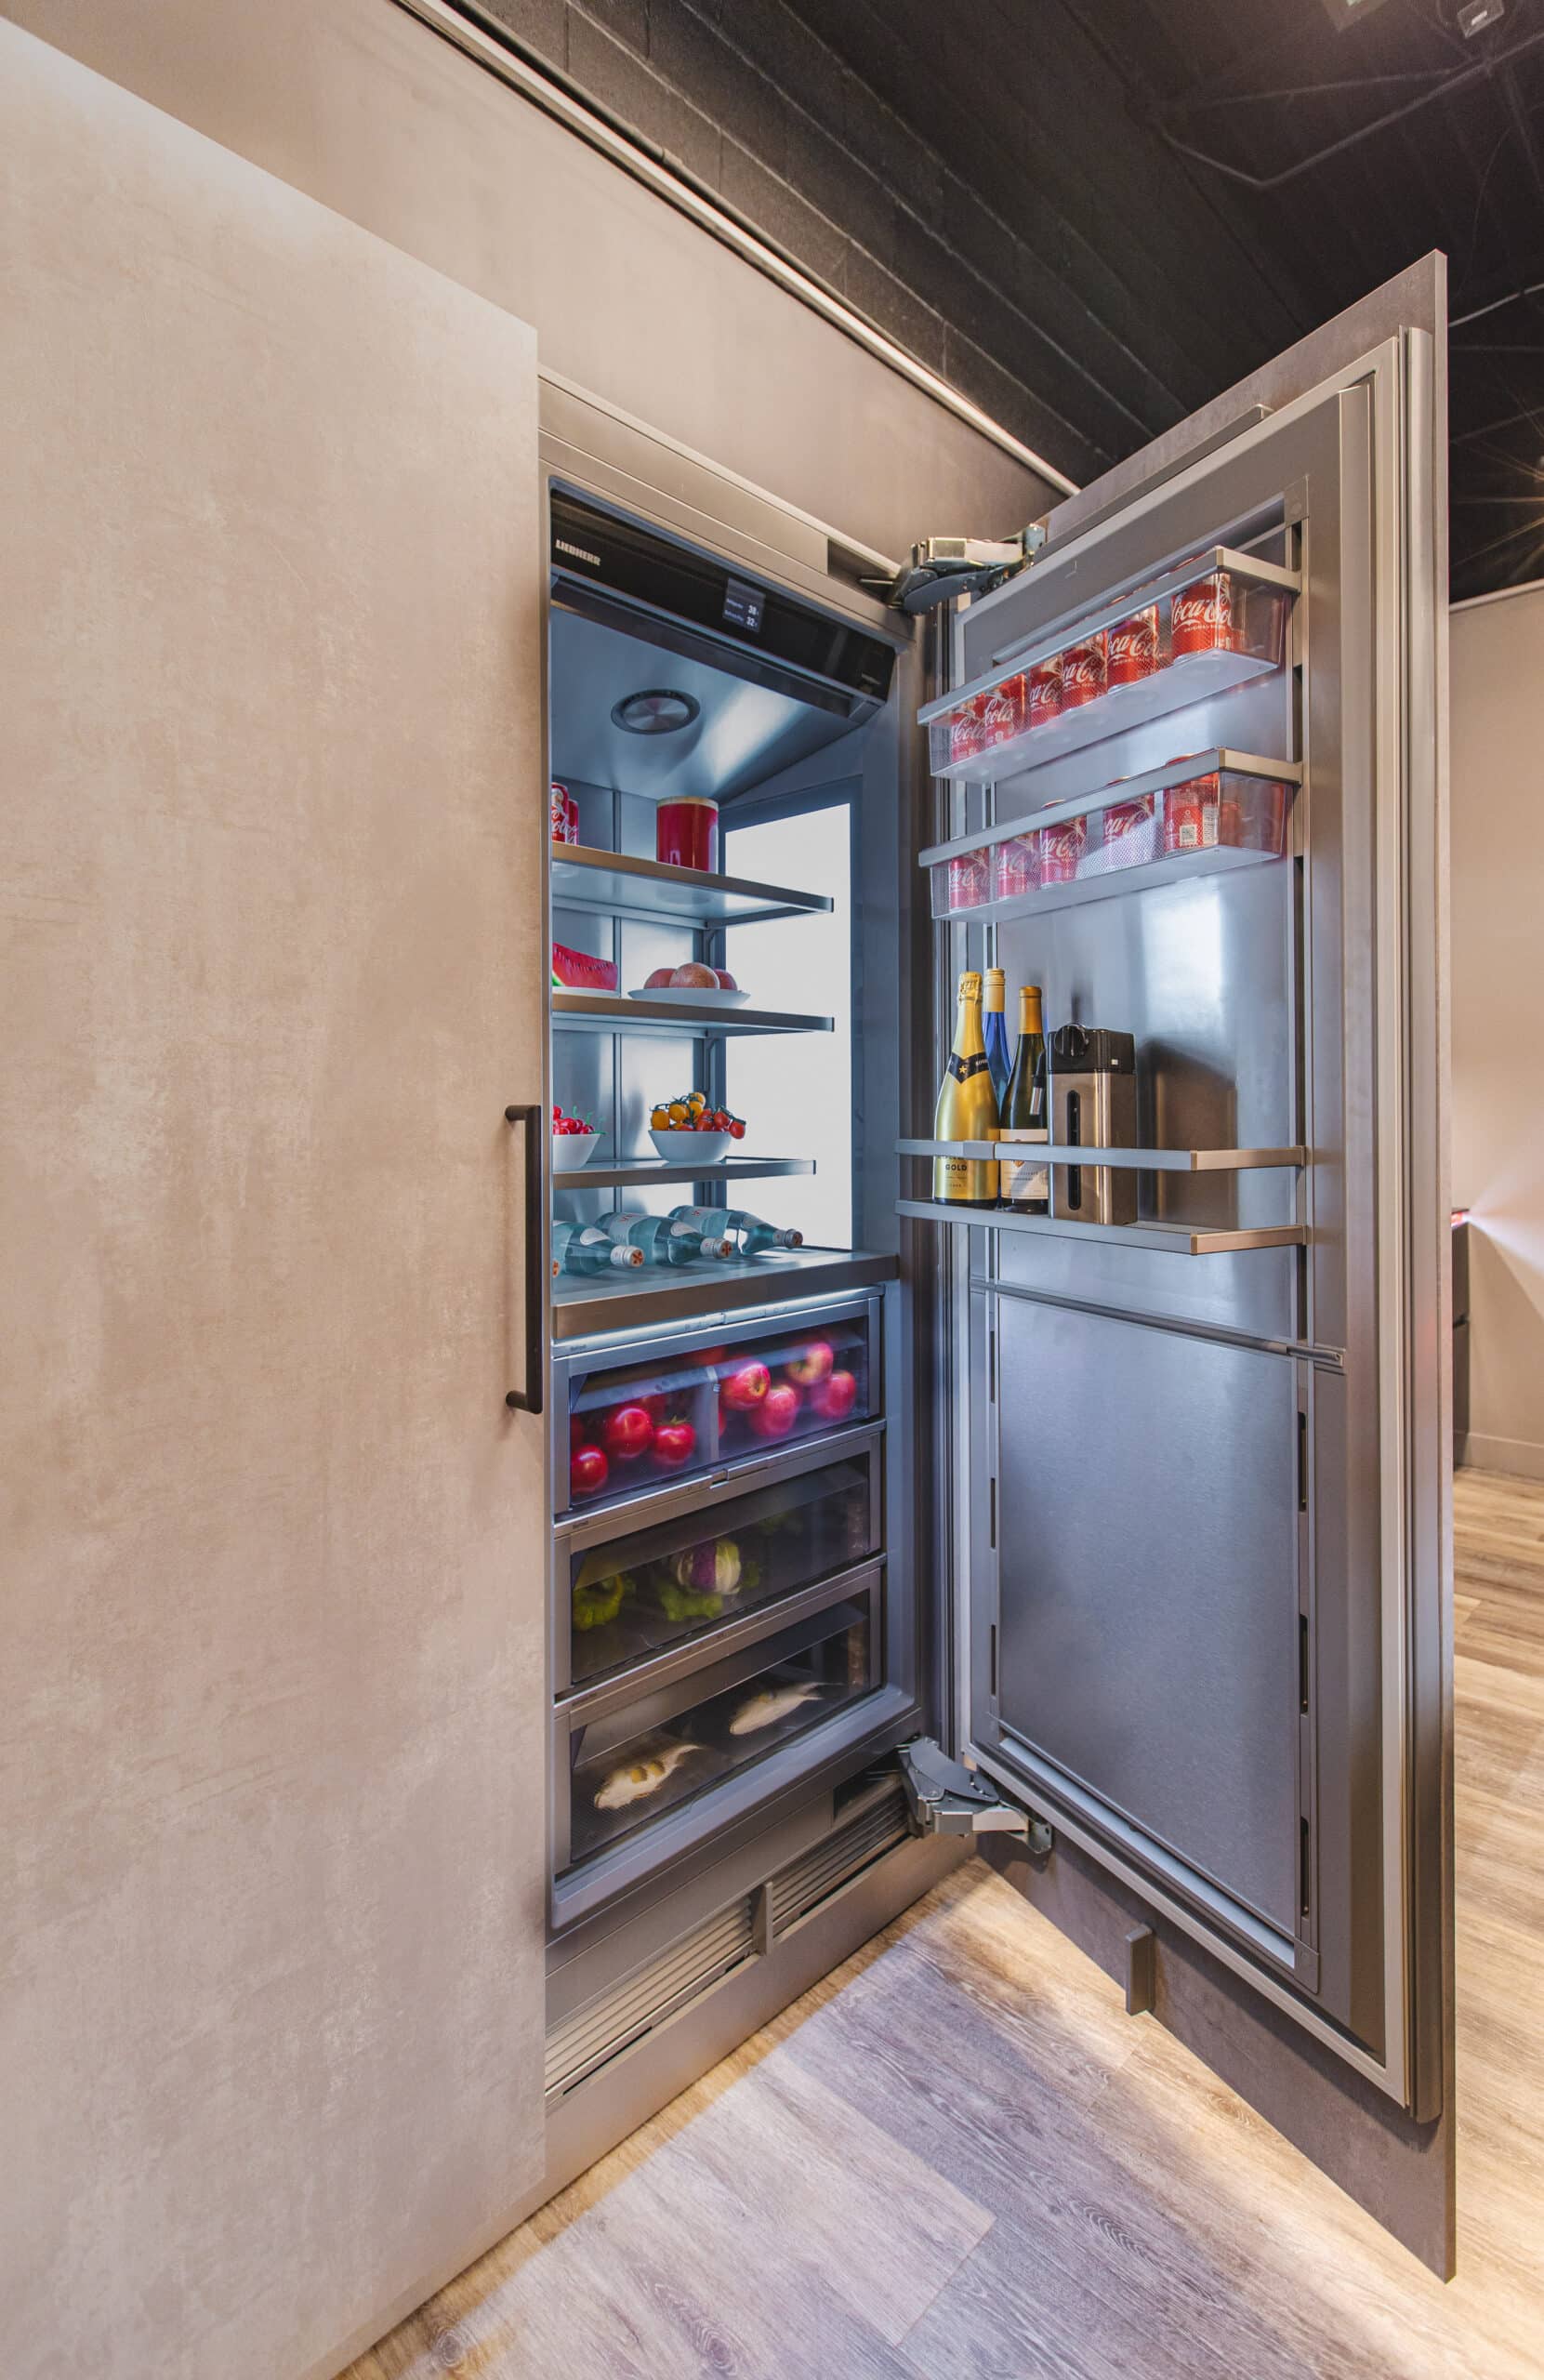 A refrigerator with both doors open